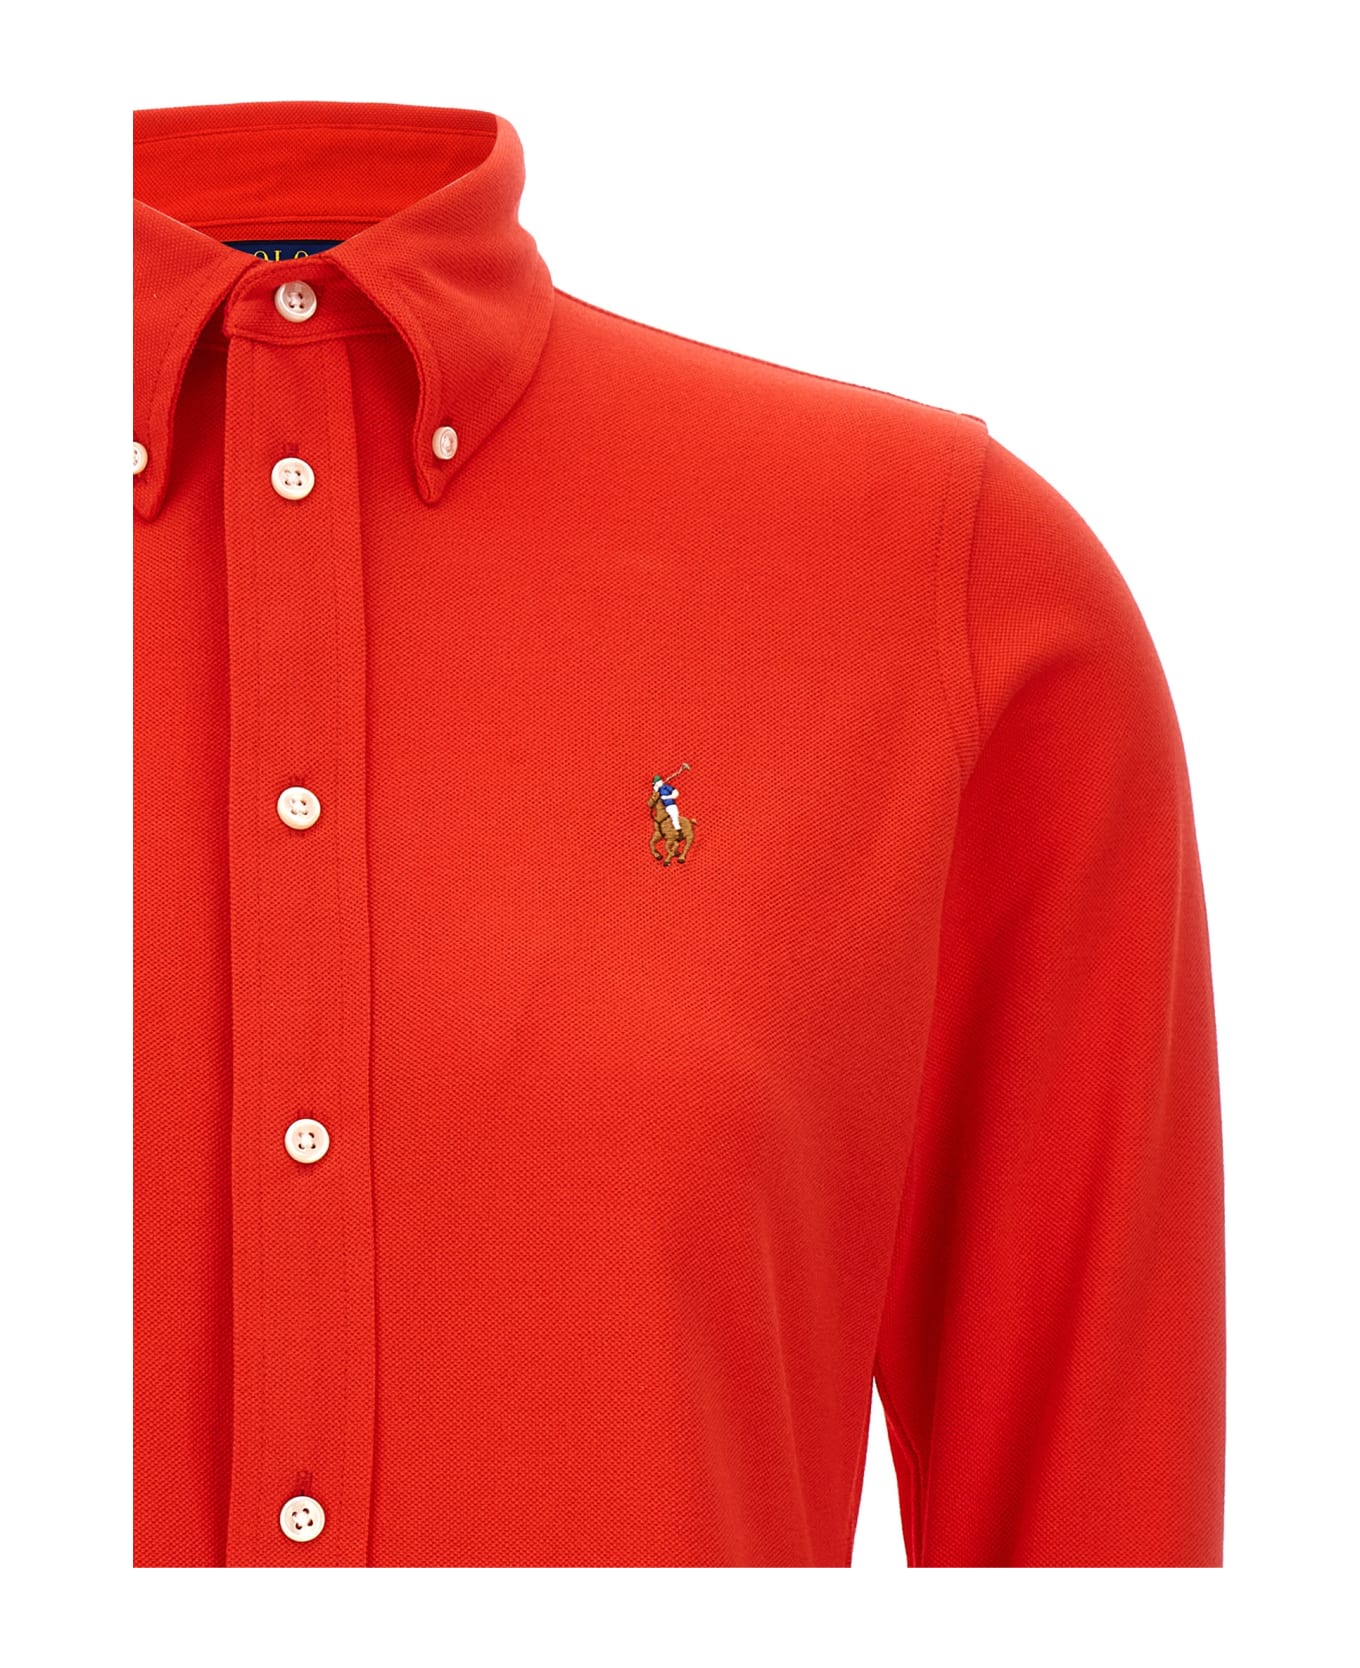 Polo Ralph Lauren Logo Embroidery Shirt - Red シャツ